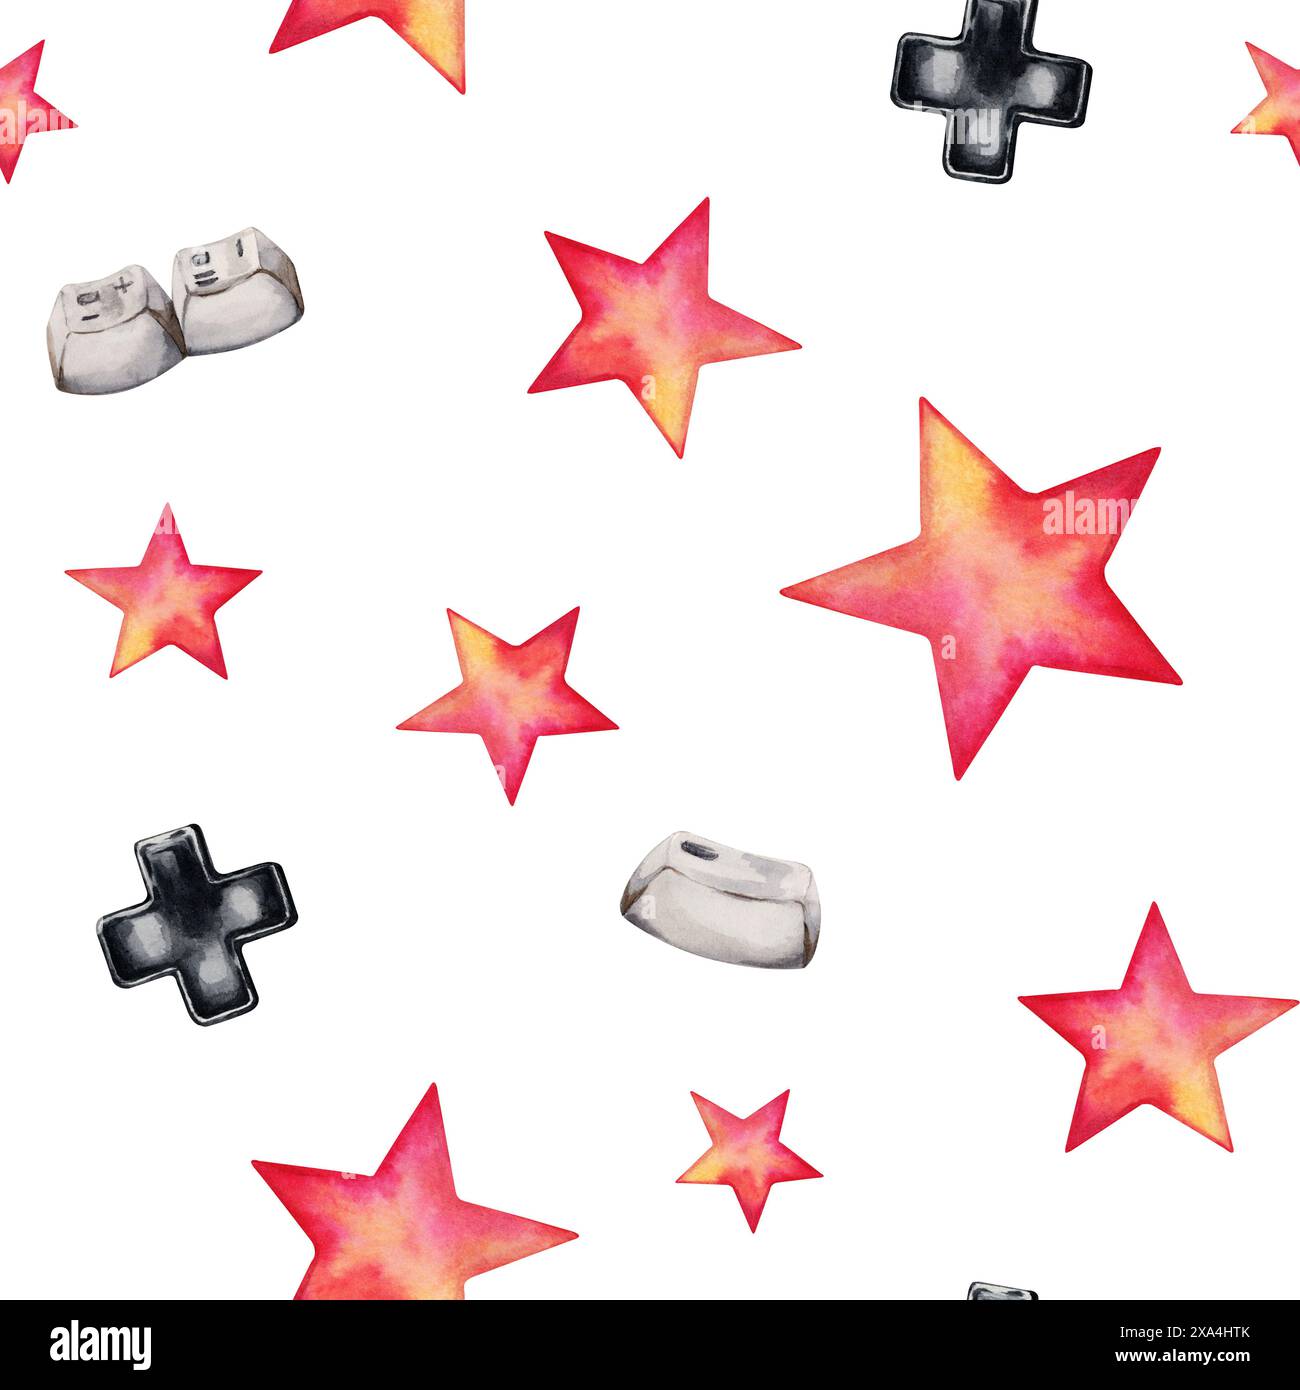 Star shapes and old computer keyboard gaming buttons seamless pattern. Hand drawn watercolor illustration isolated on white background. 80s 90s themed Stock Photo